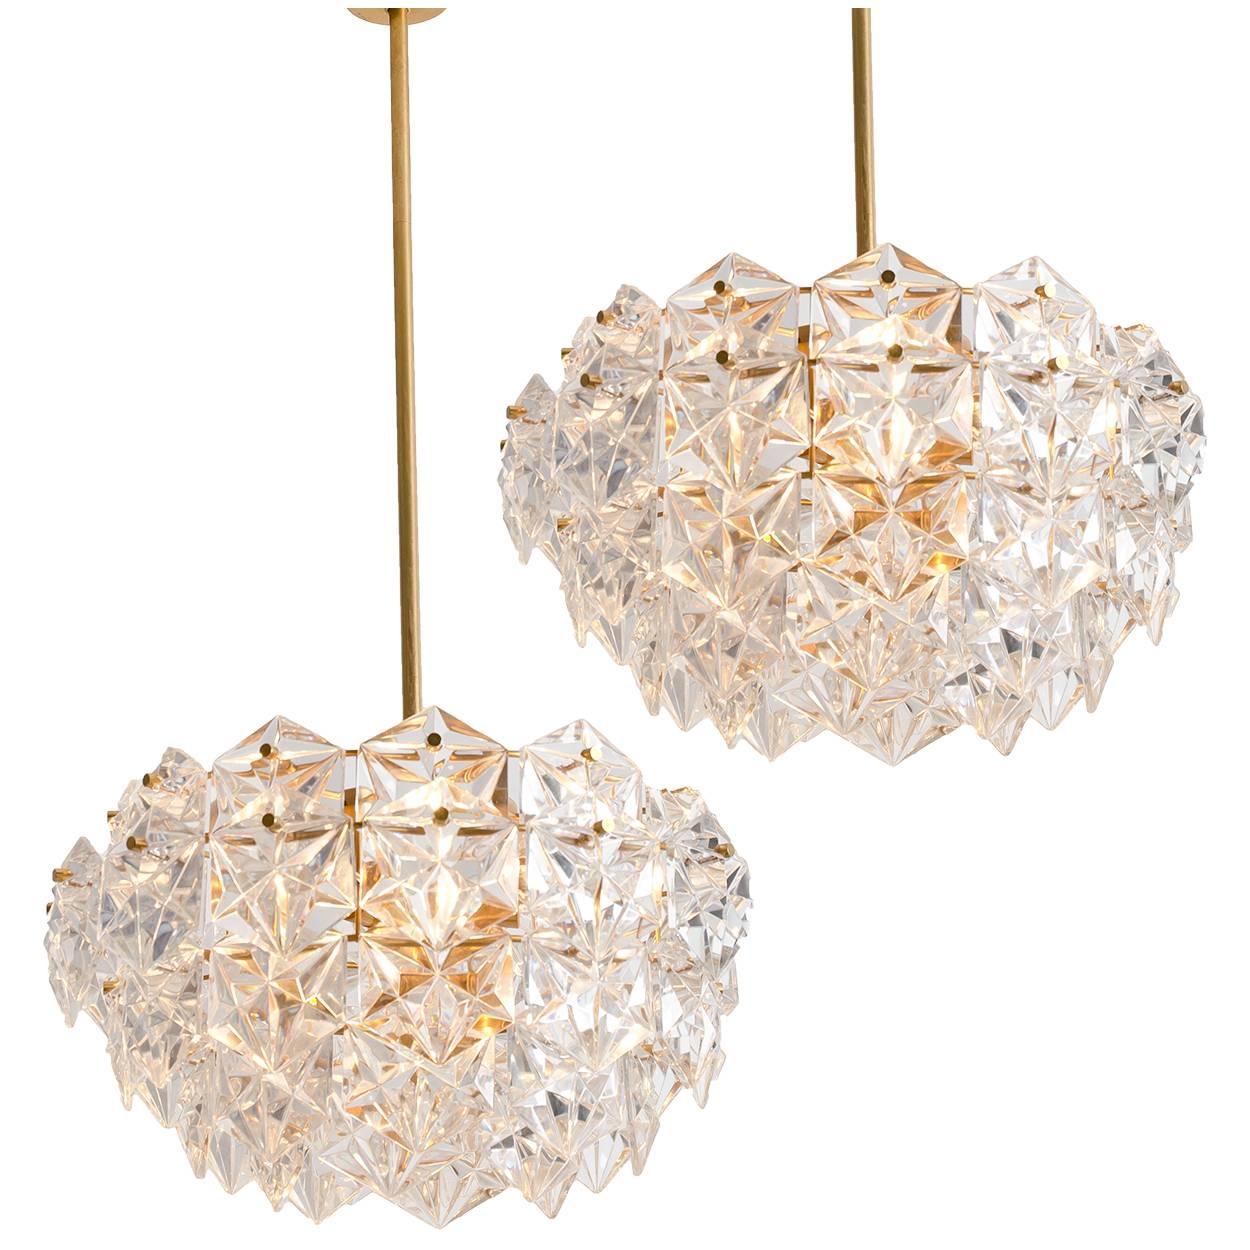 This set of modernist design light fixtures were designed by the Kinkeldey design team during the 1970s, and manufactured in Germany by Kinkeldey. Two chandeliers and two wall scones. The frame from the chandeliers is stamped with the Kinkeldey